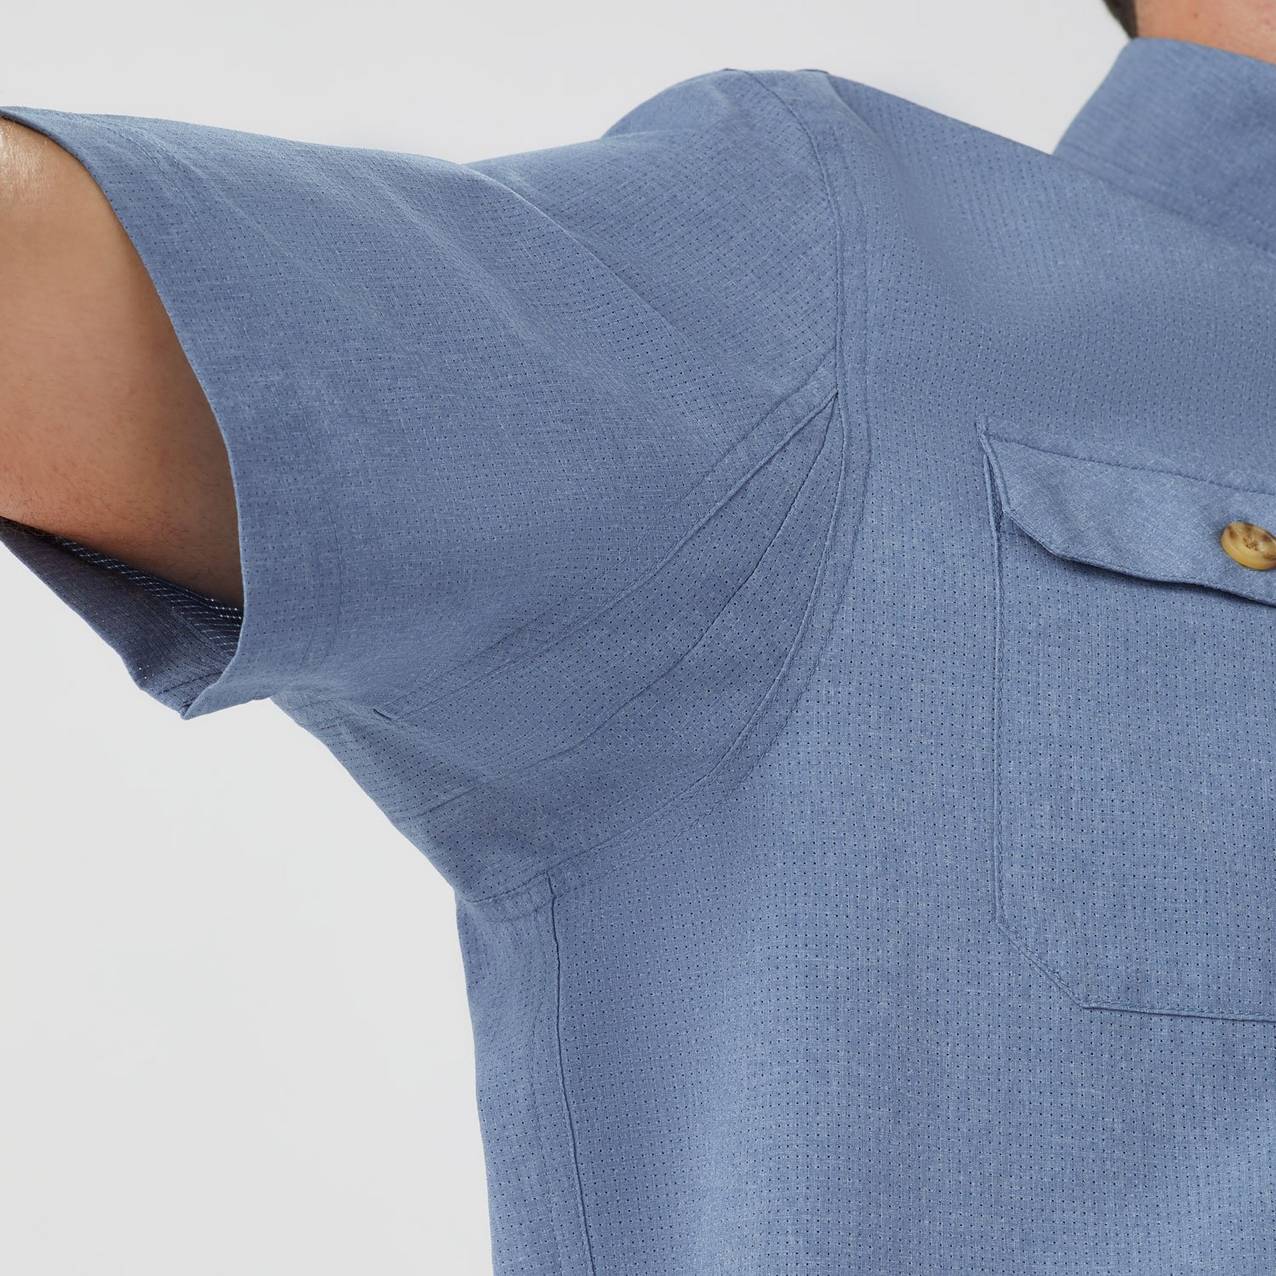 View of reach gusset in underarm of shirt